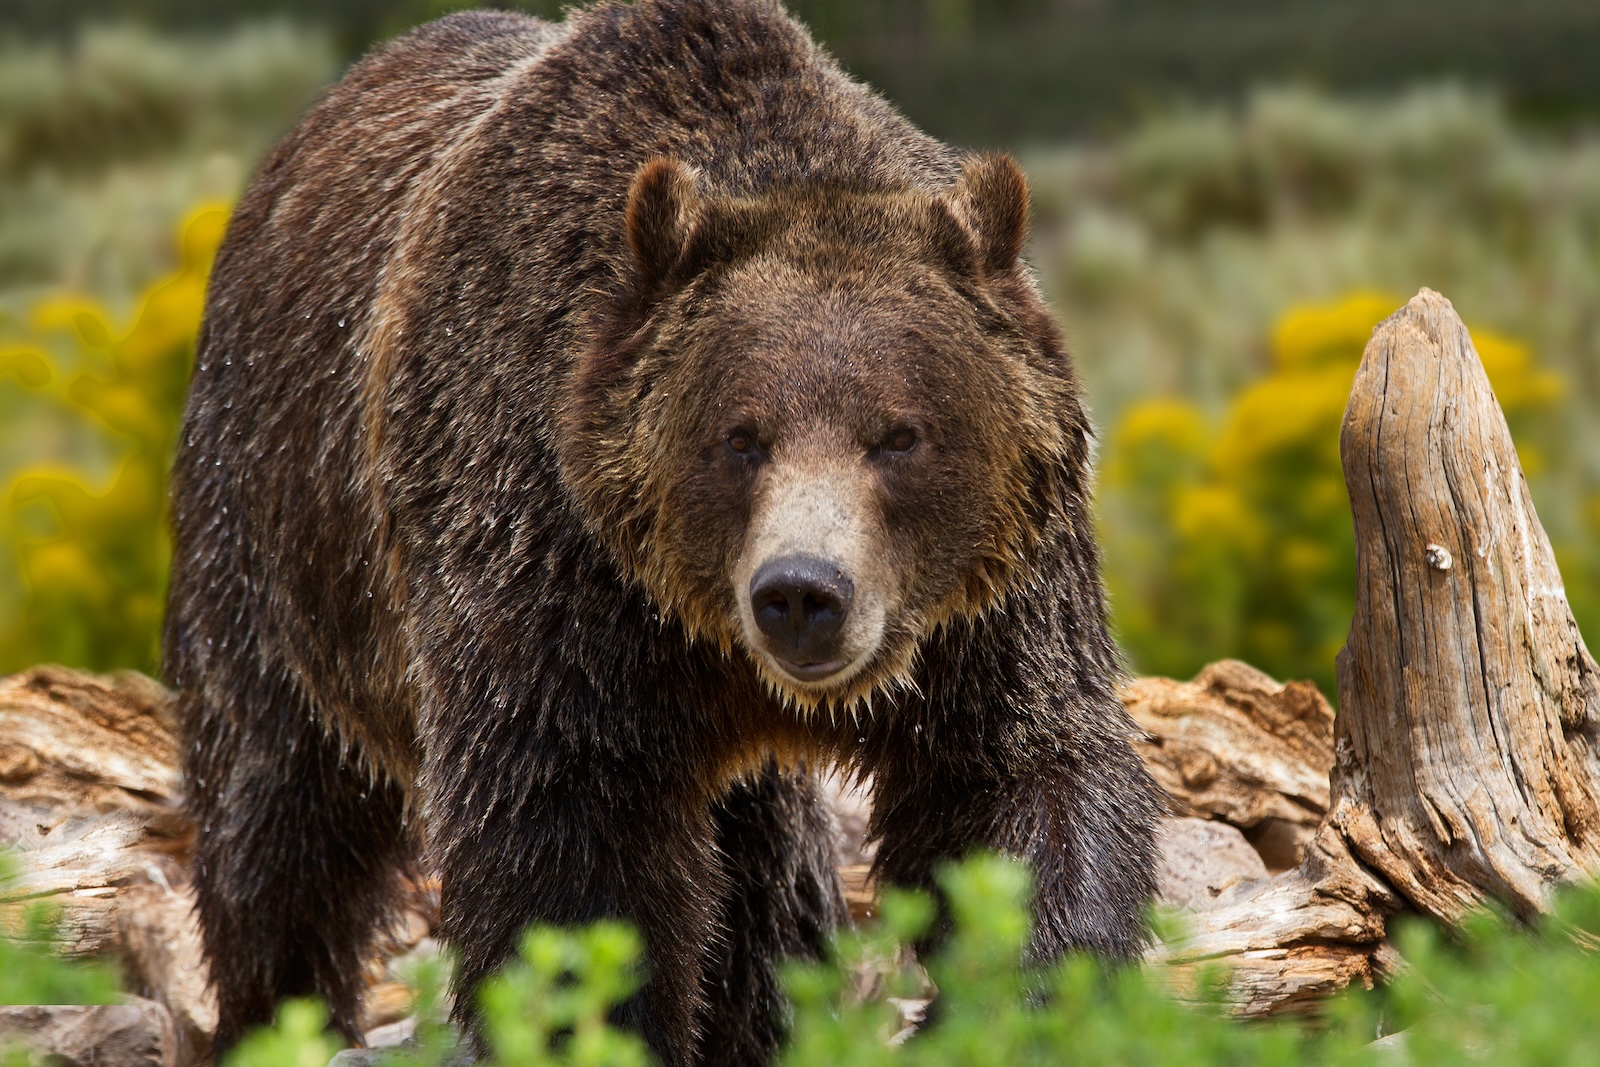 Large grizzly bear in Yellowstone National Park. Image credit: Vividpixels | Dreamstime